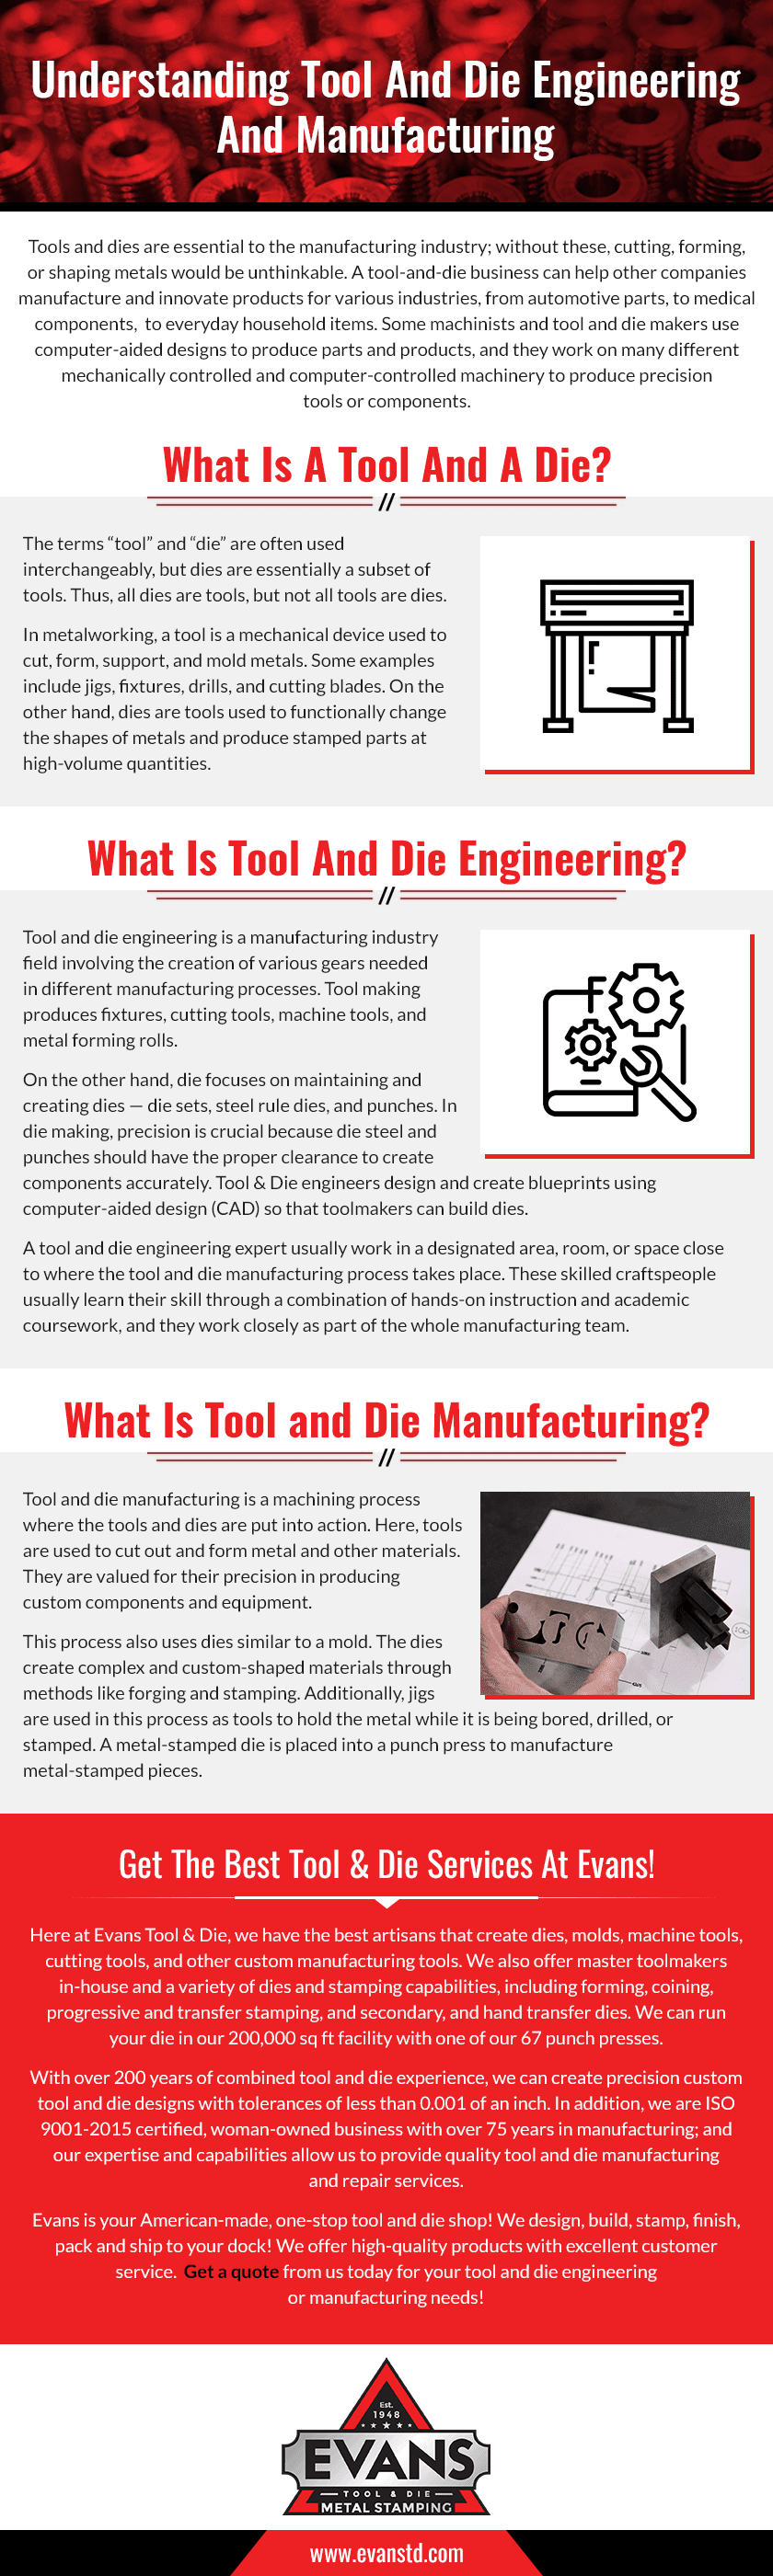 Understanding-Tool-And-Die-Engineering-And-Manufacturing